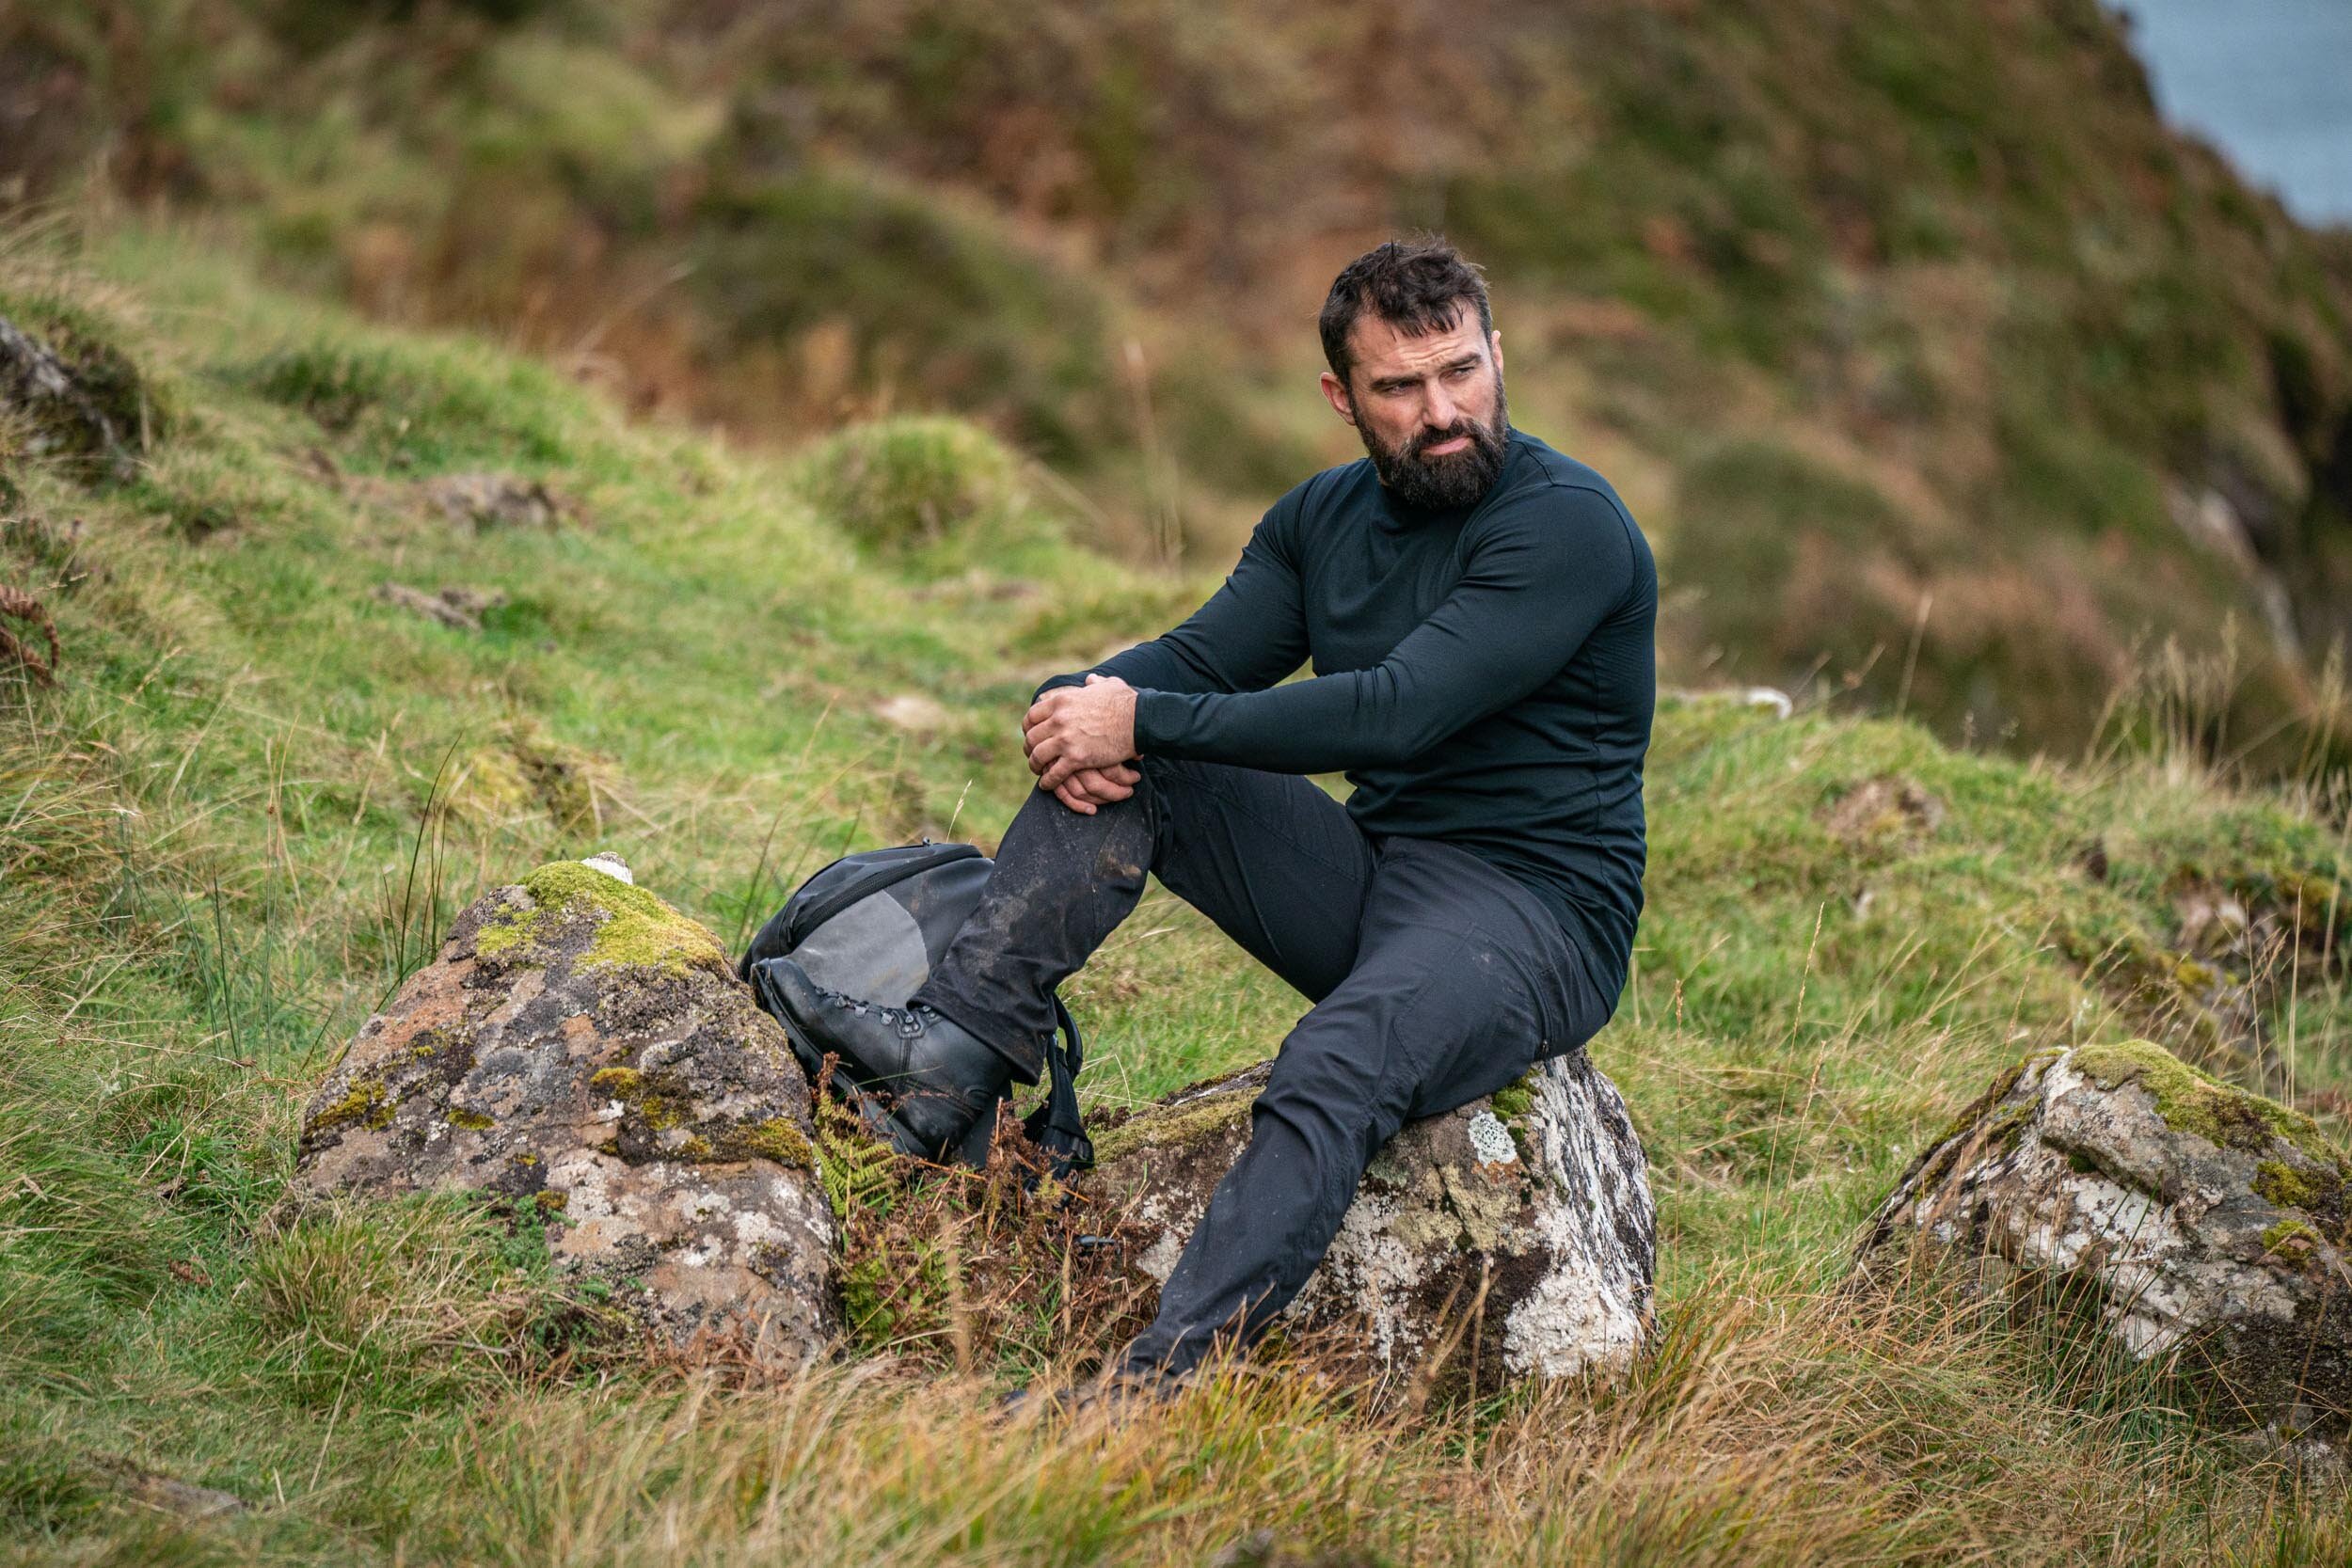  Chief Instructor Ant Middleton  Episode 3  Minnow Films / Channel 4 